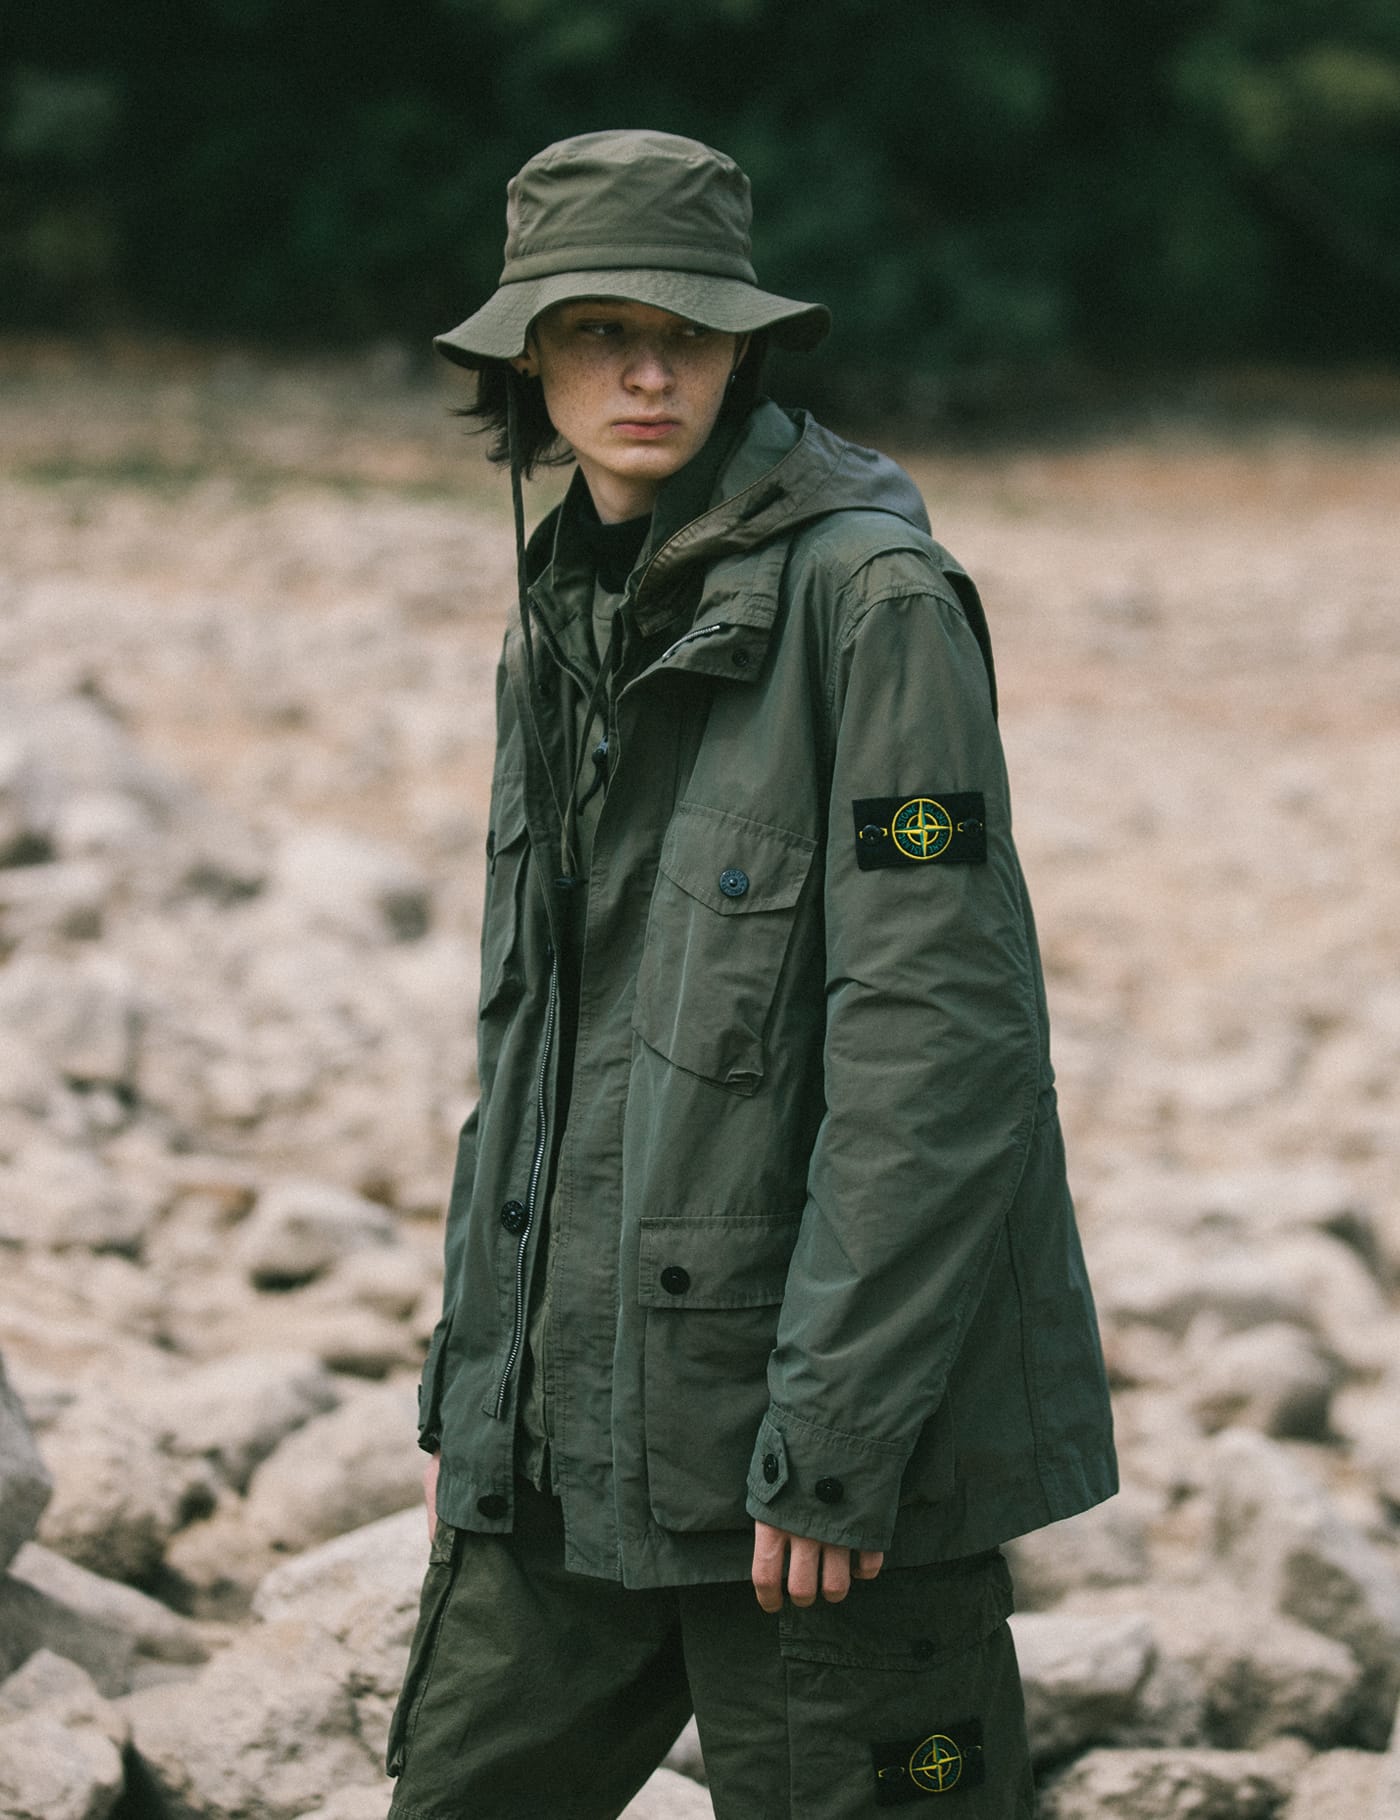 Stone Island - Field Jacket | HBX - Globally Curated Fashion and